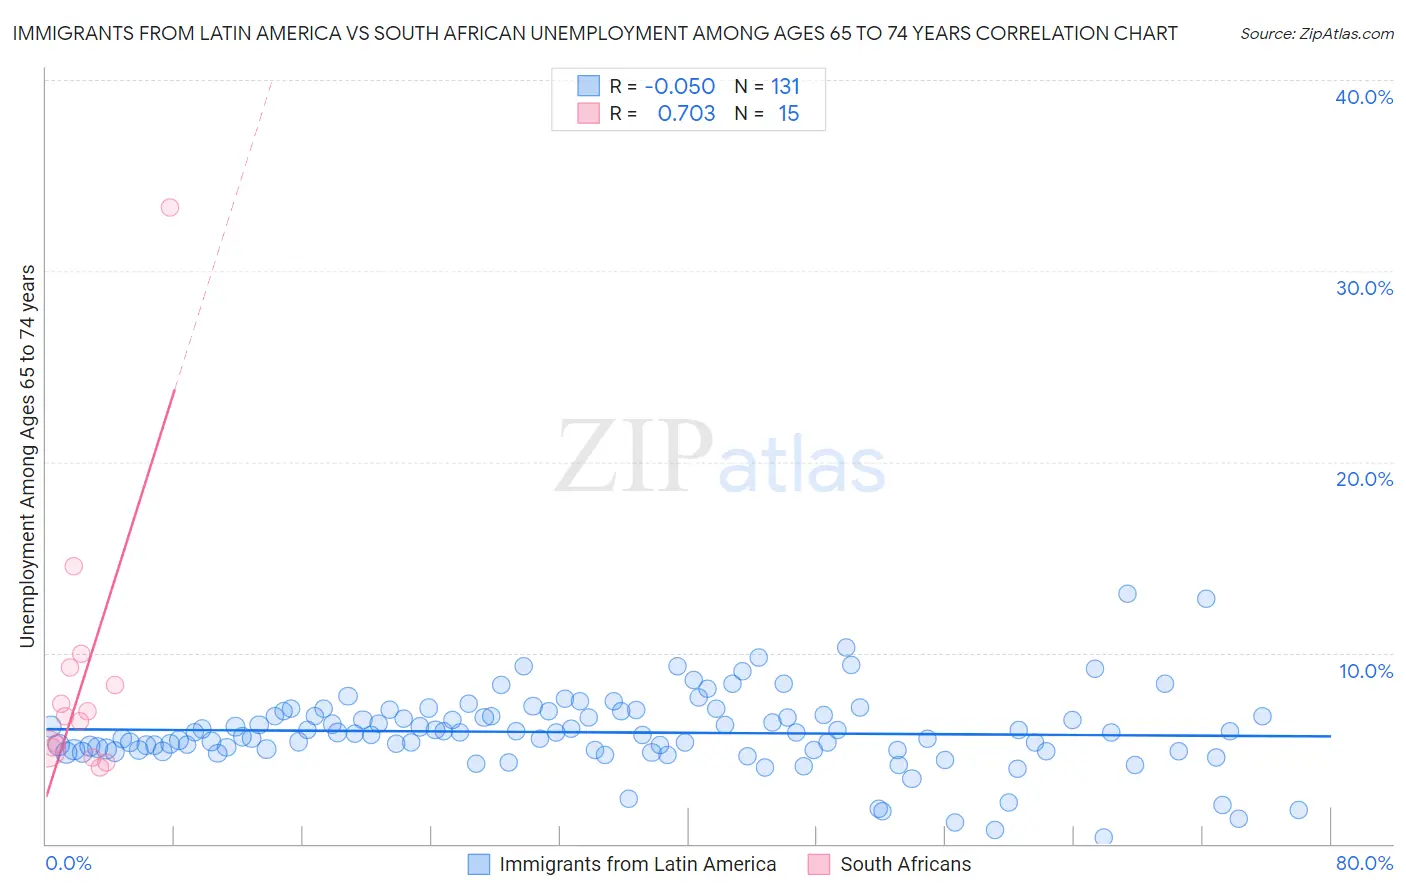 Immigrants from Latin America vs South African Unemployment Among Ages 65 to 74 years